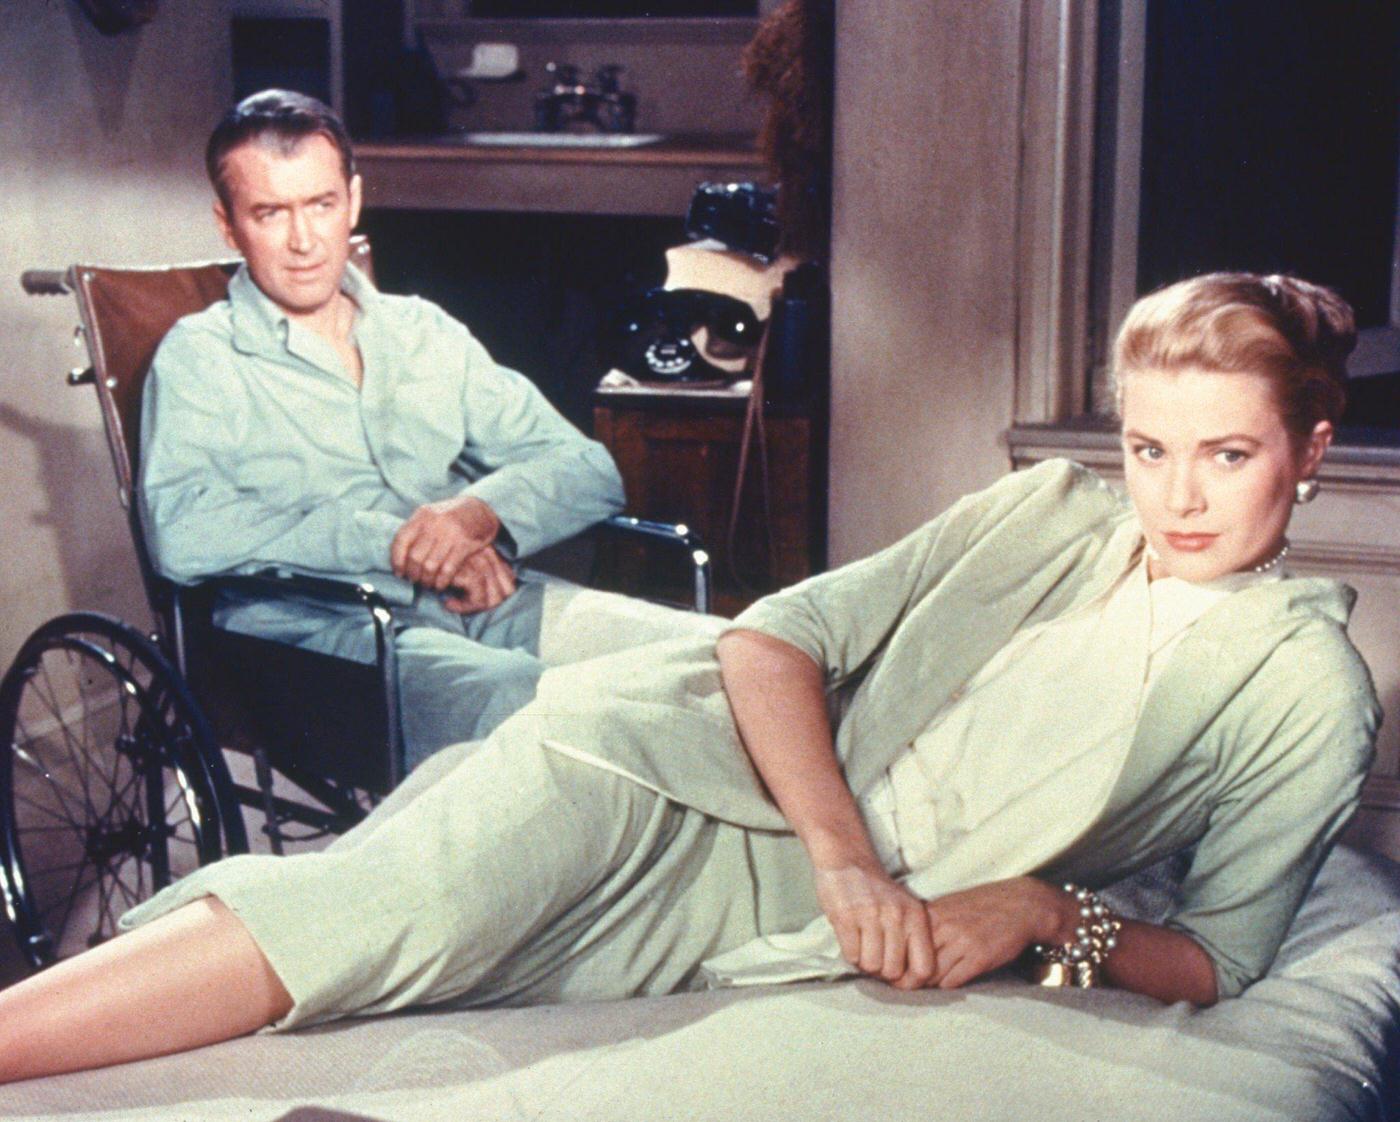 James Stewart wearing pyjamas as he sits in his wheelchair, while Grace Kelly lays on a bed in a publicity still issued for the film, 'Rear Window', 1954